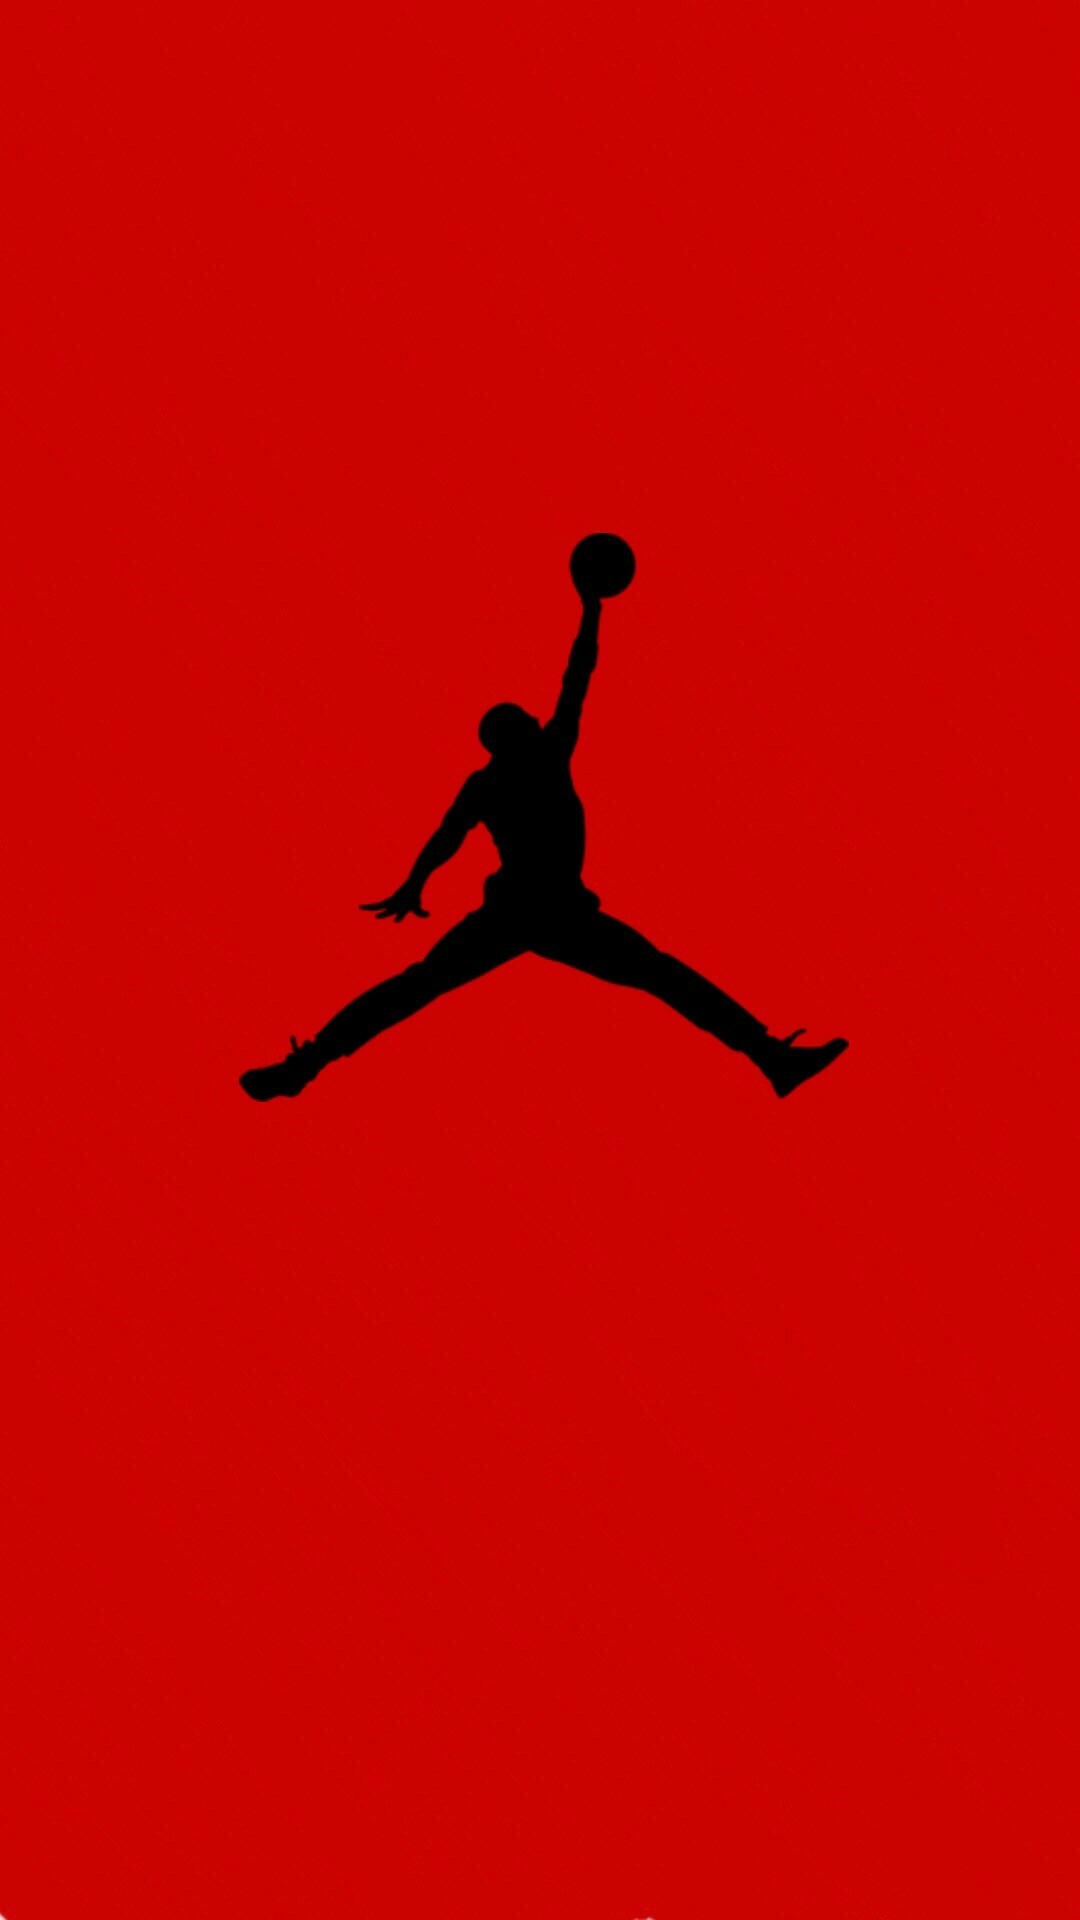 Michael Jordan: Was honored with the NBA Defensive Player of the Year and the Most Valuable Player awards in 1988. 1080x1920 Full HD Background.